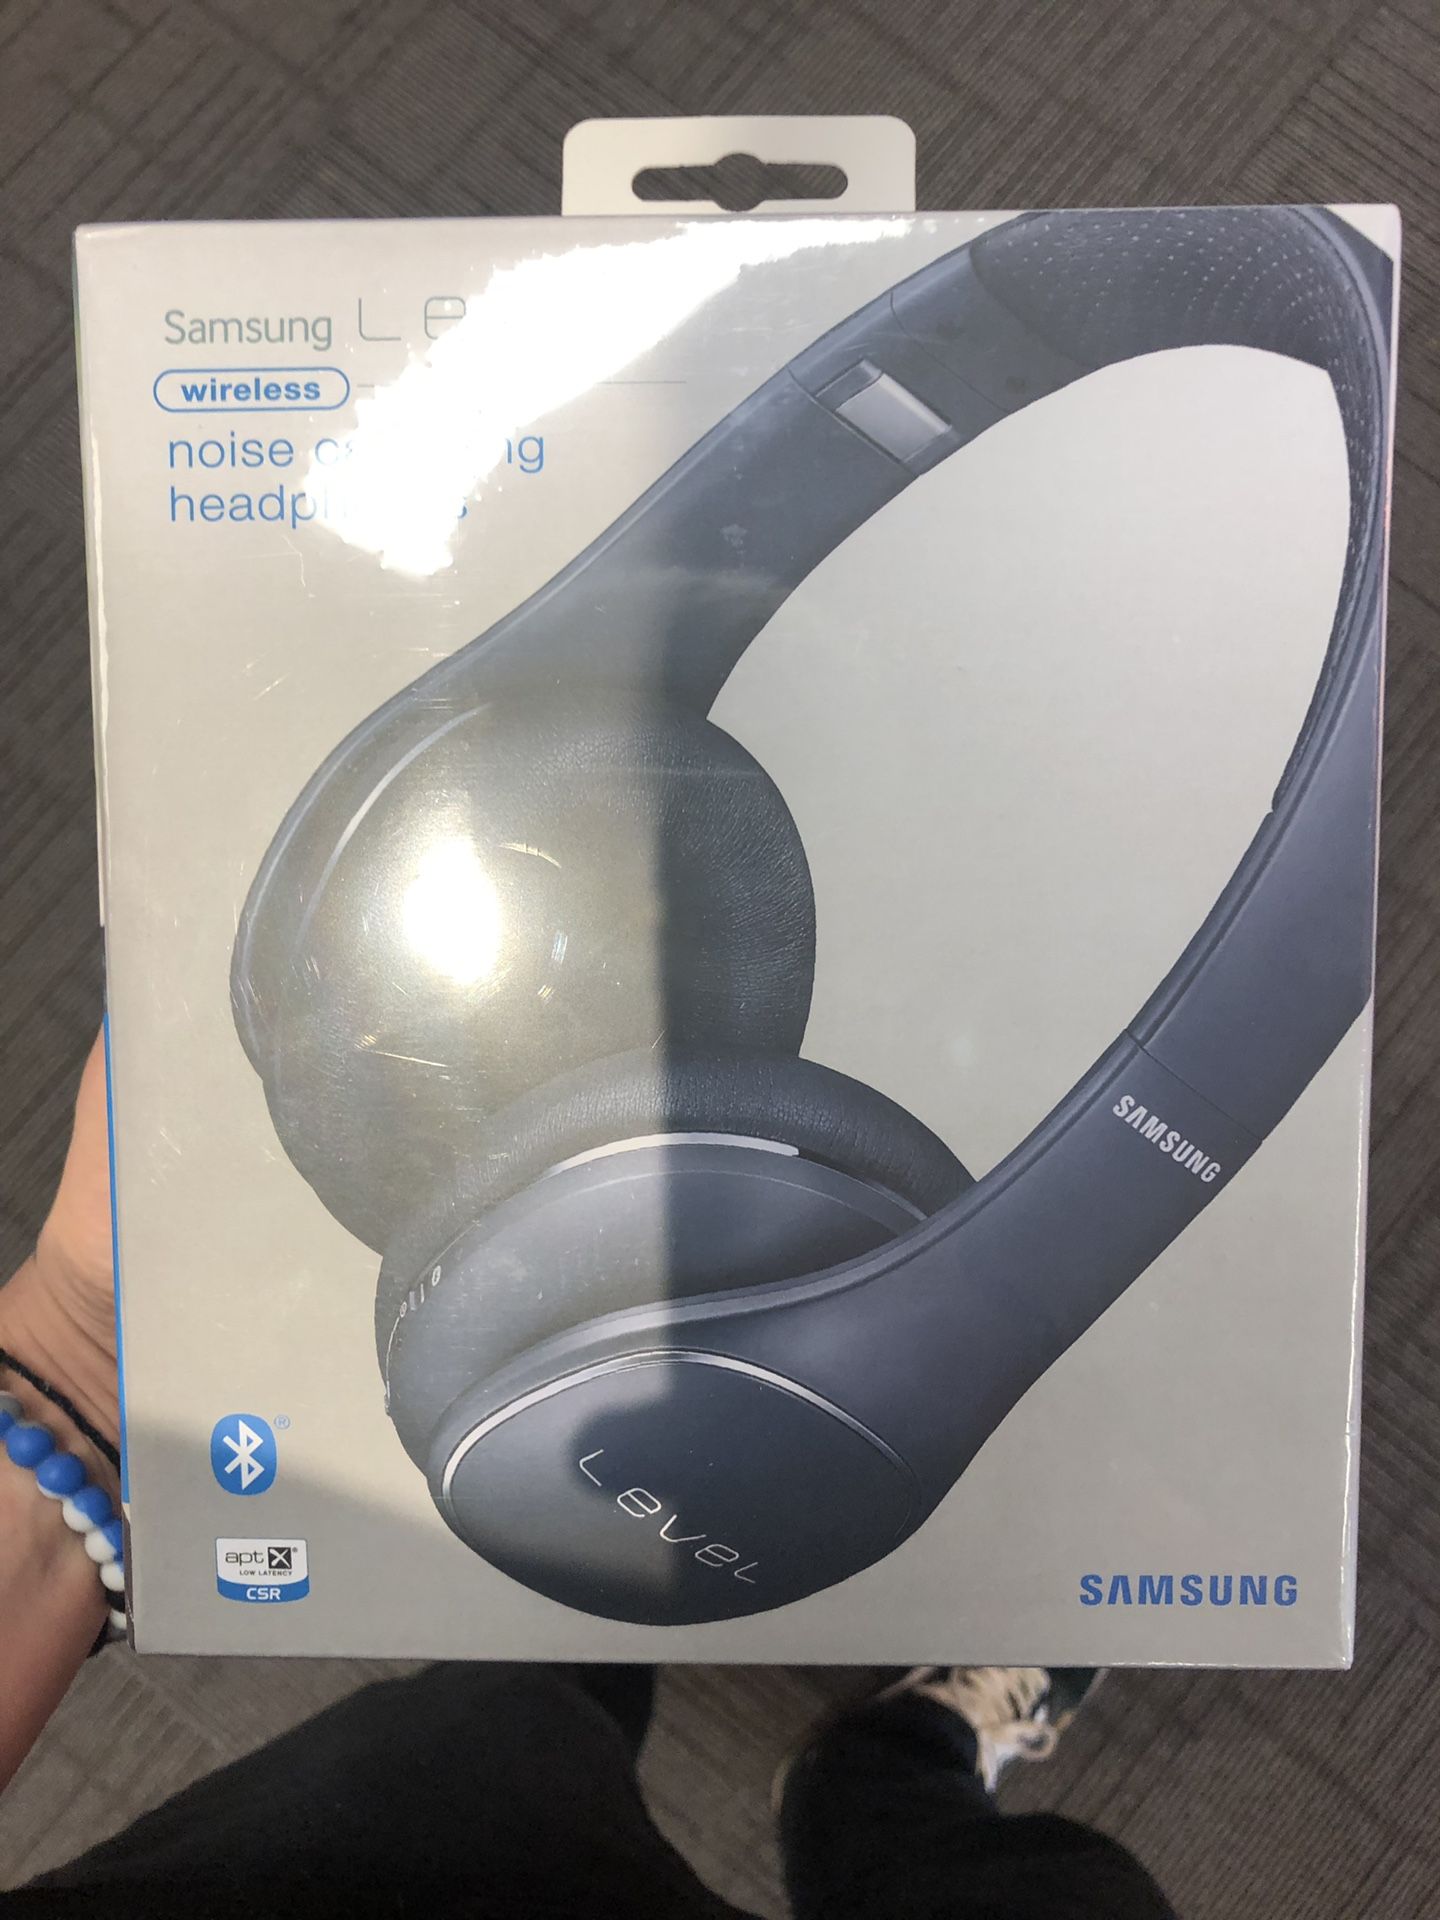 Samsung noise cancelling Bluetooth headphones